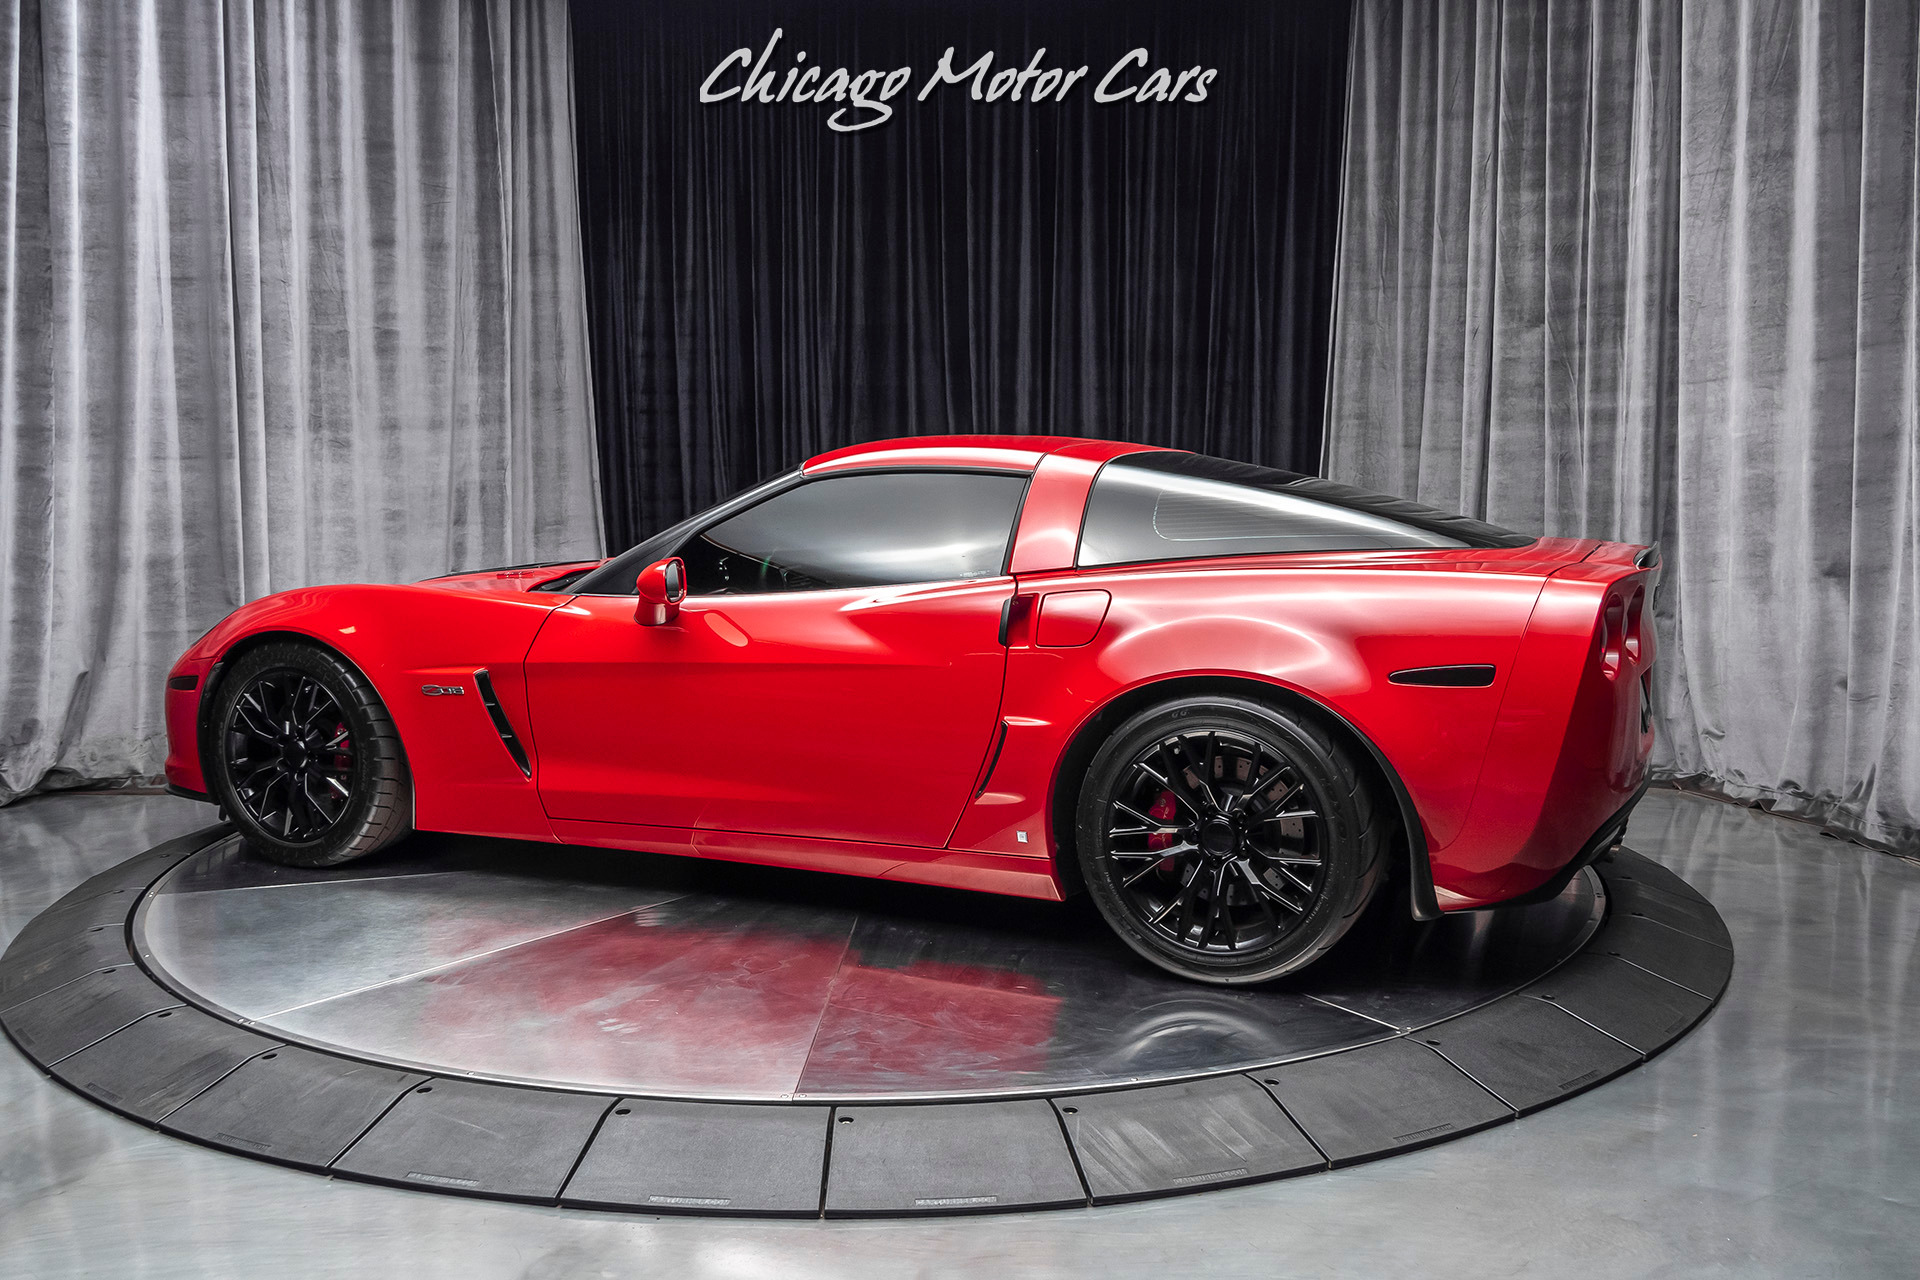 Used-2008-Chevrolet-Corvette-Z06-ONLY-16K-MILES---SUPERCHARGED-800HP-TUNED-BY-SPEED-INC